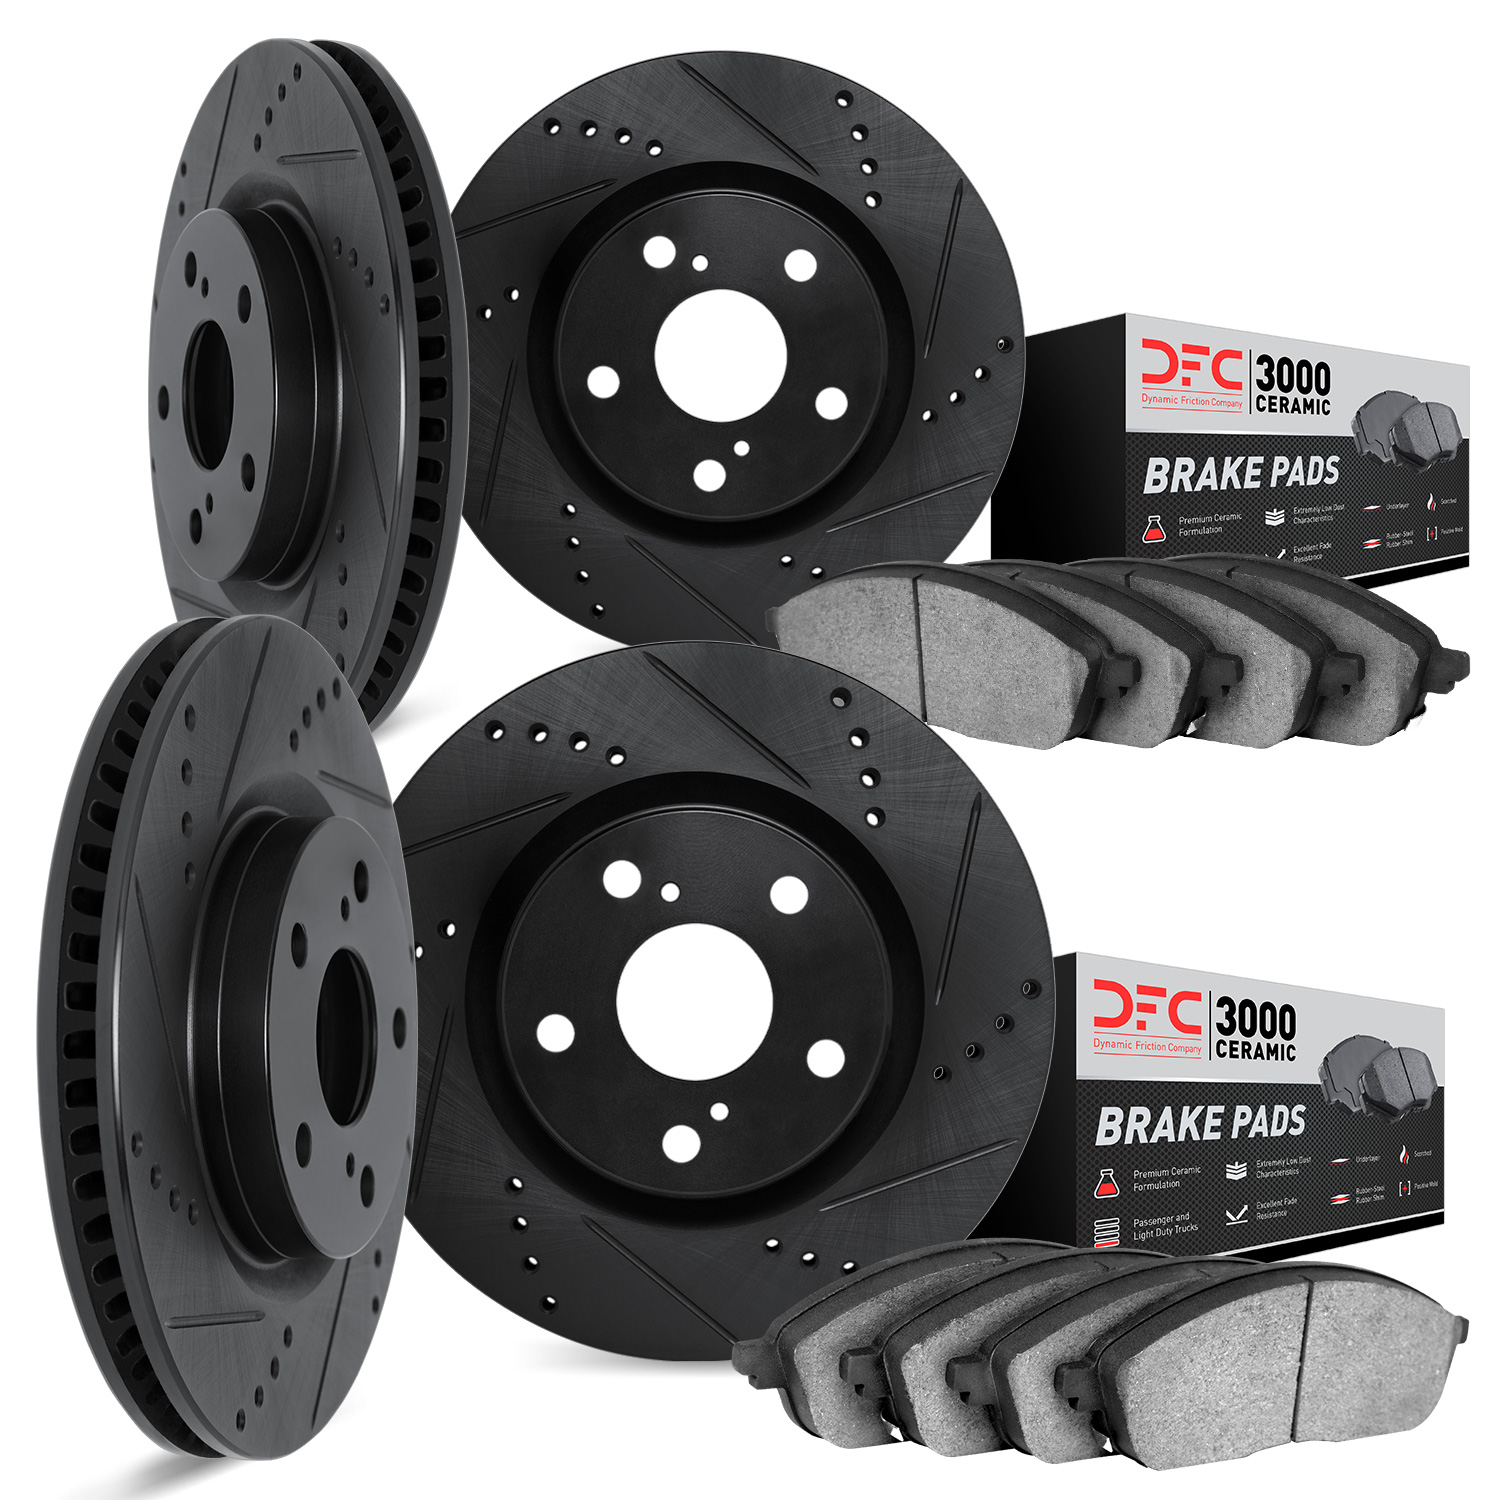 8304-39003 Drilled/Slotted Brake Rotors with 3000-Series Ceramic Brake Pads Kit [Black], 1991-1995 Mopar, Position: Front and Re